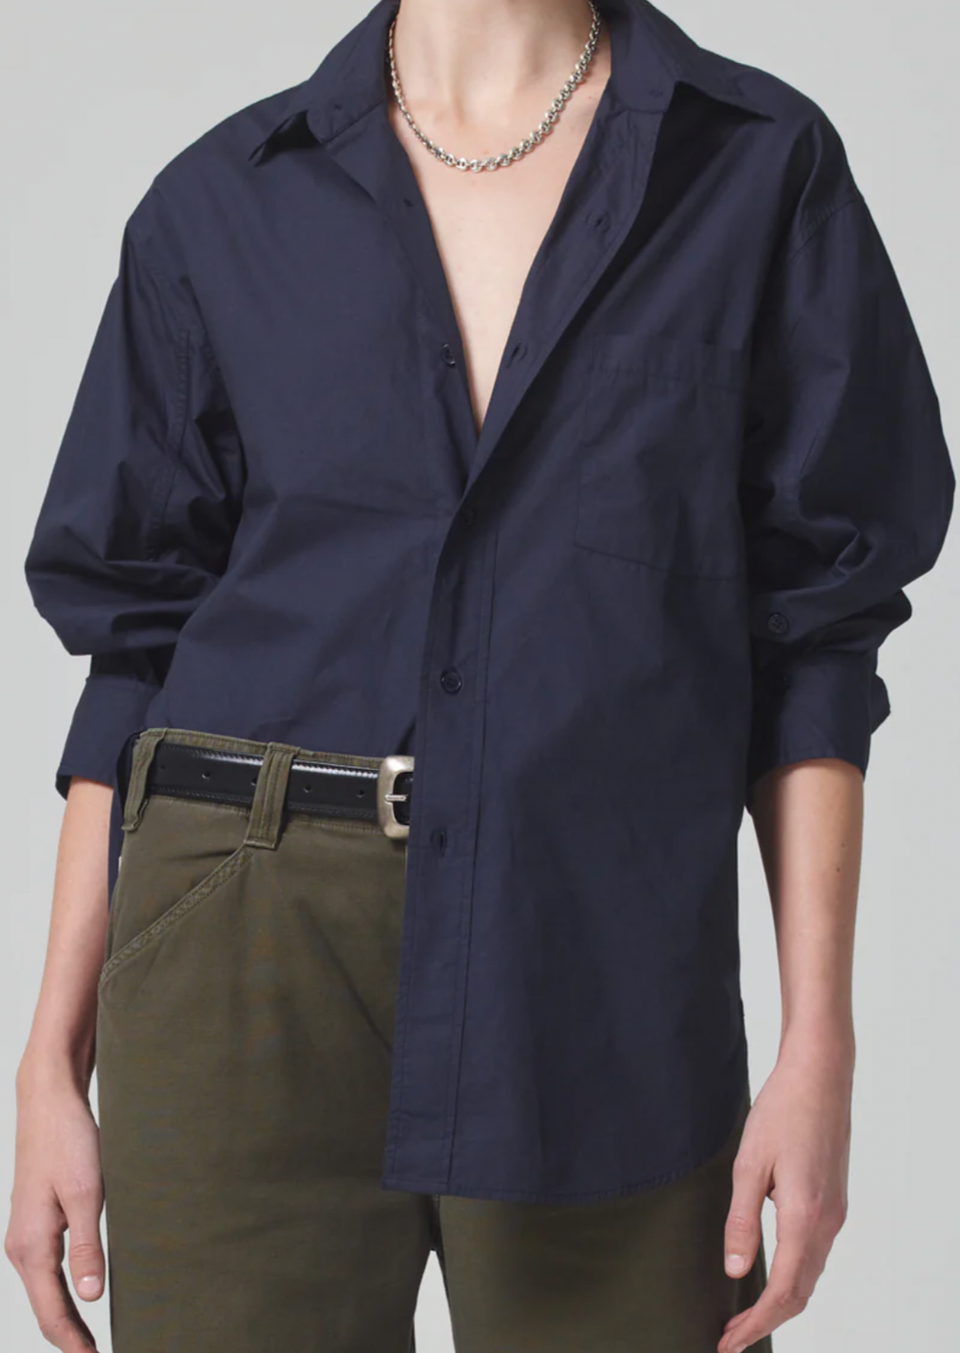 The Kayla Shirt for Citizens of Humanity in Navy